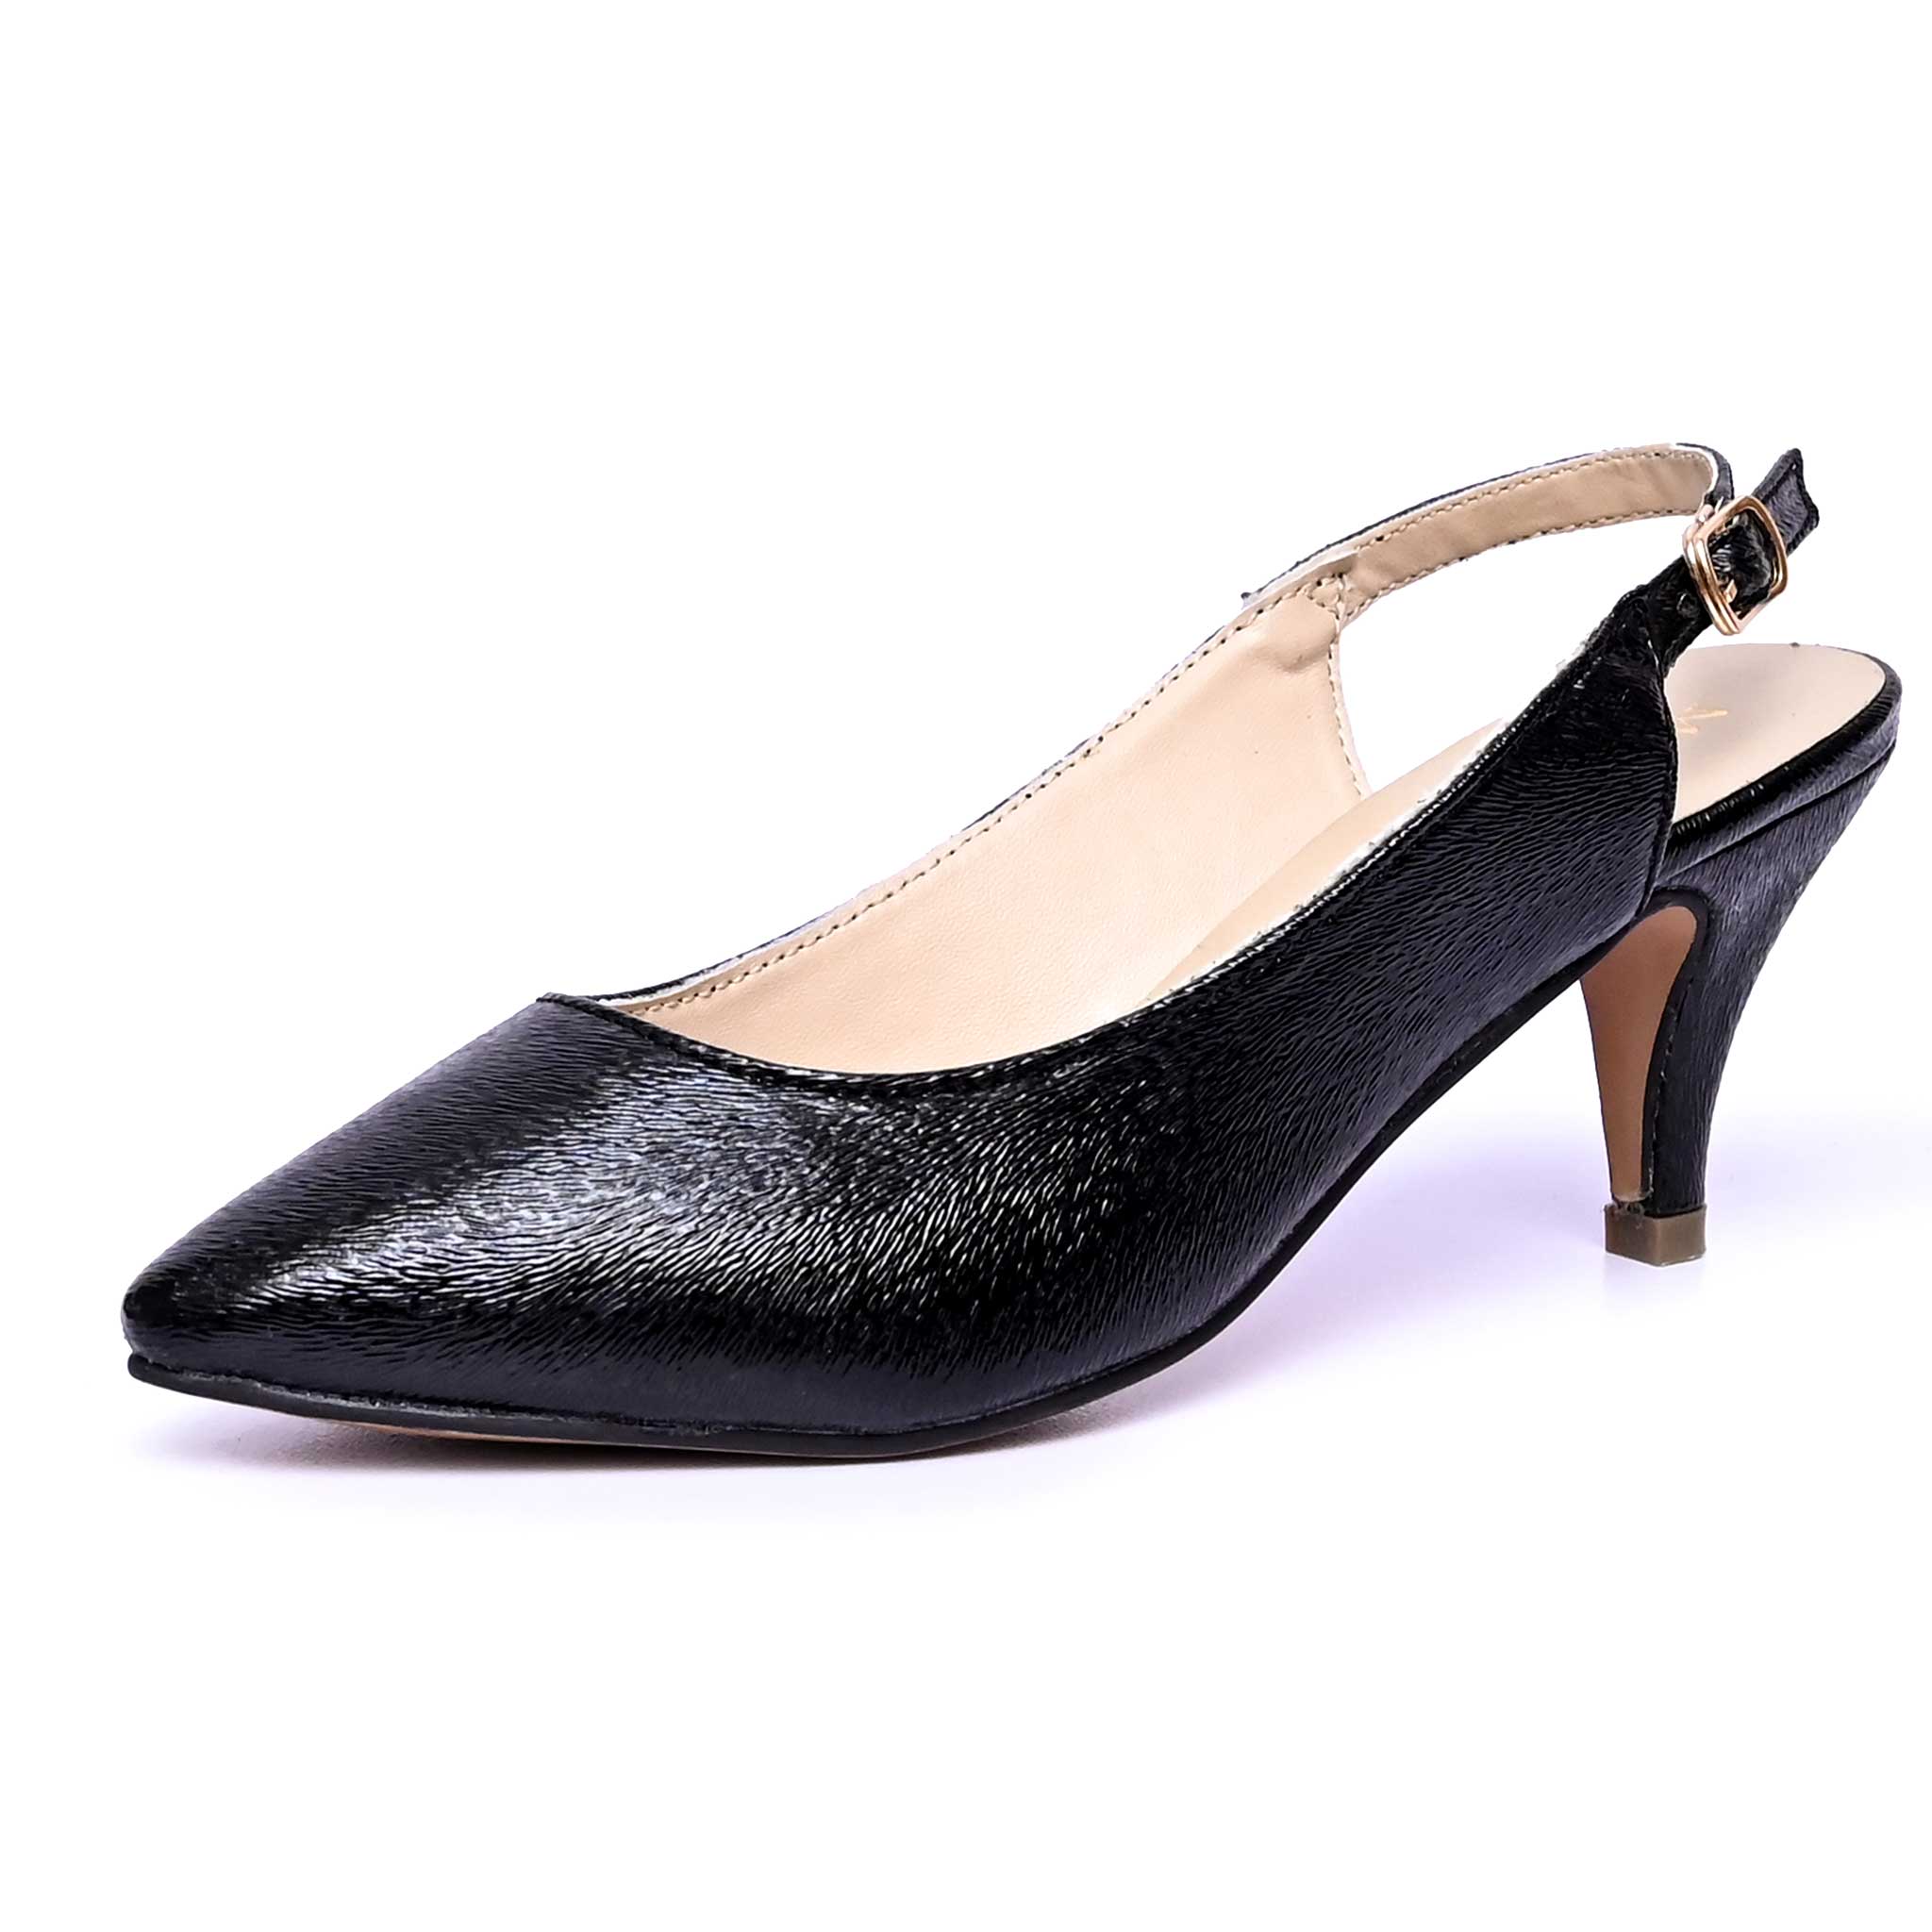 Court Shoes For Women - Metro-10900472